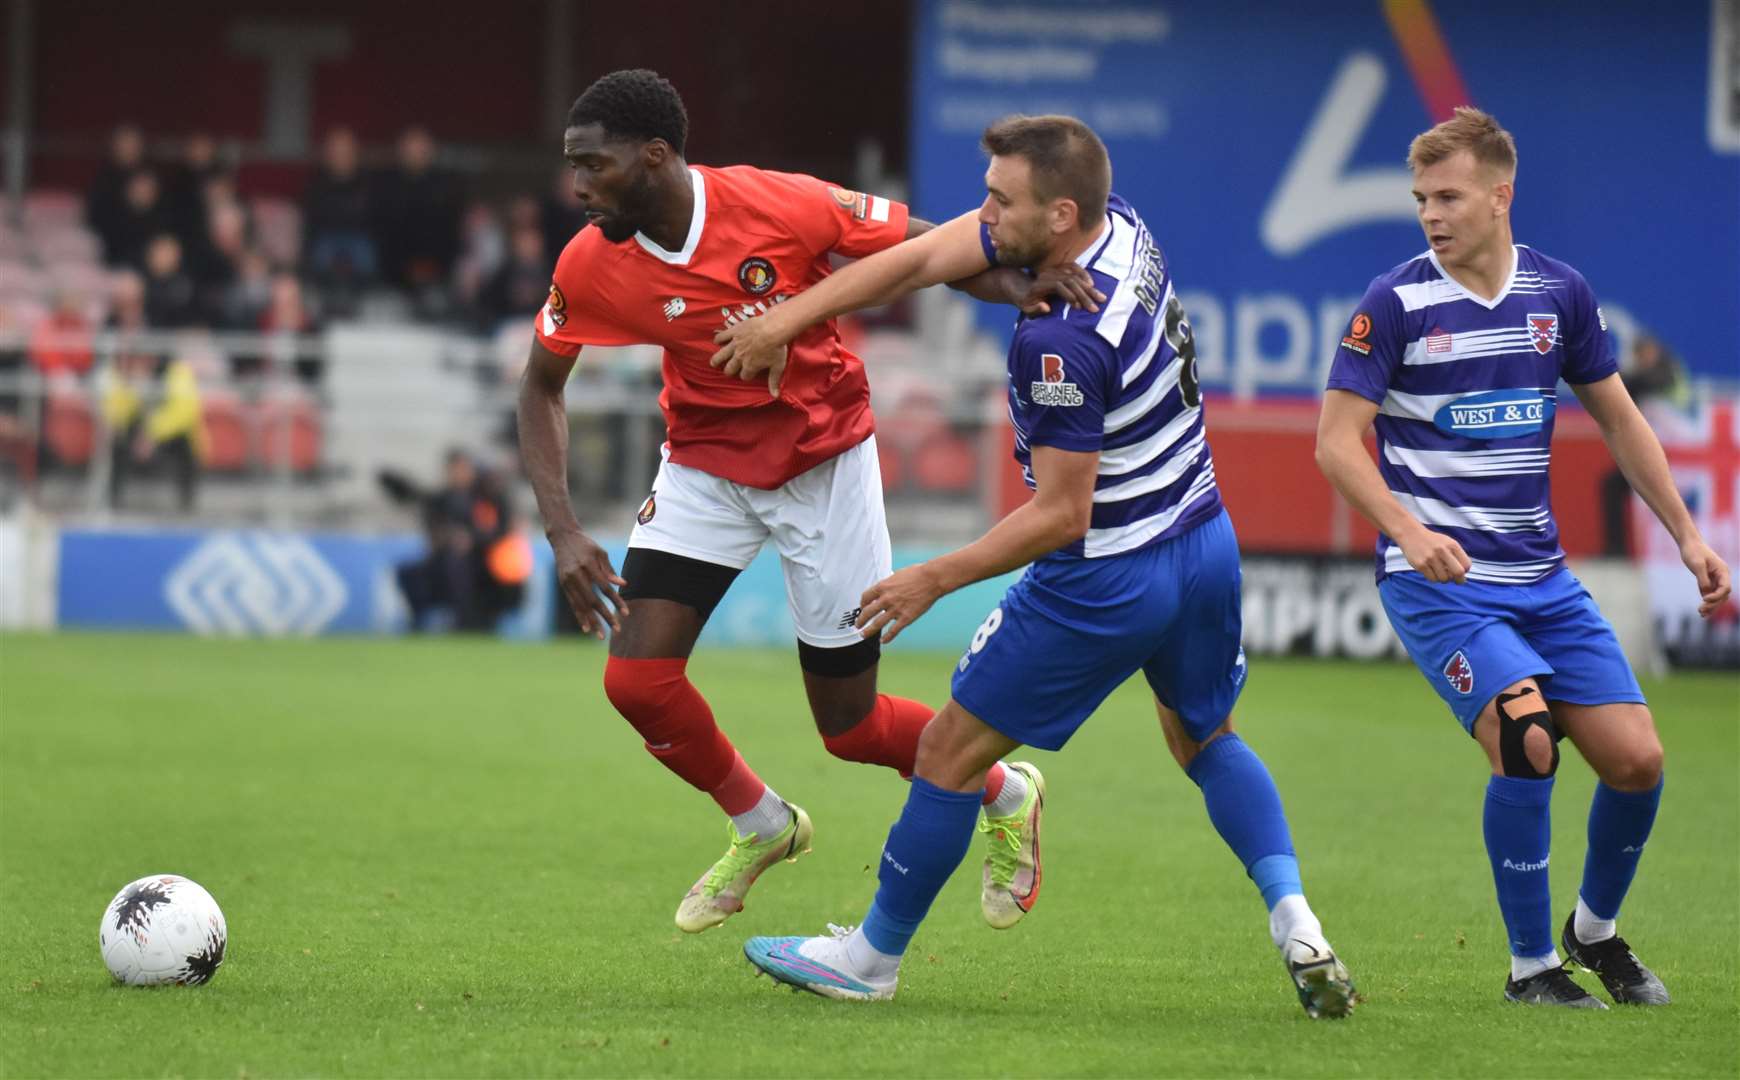 Ebbsfleet try to find a way through against Dagenham on Saturday. Picture: Ed Miller/EUFC